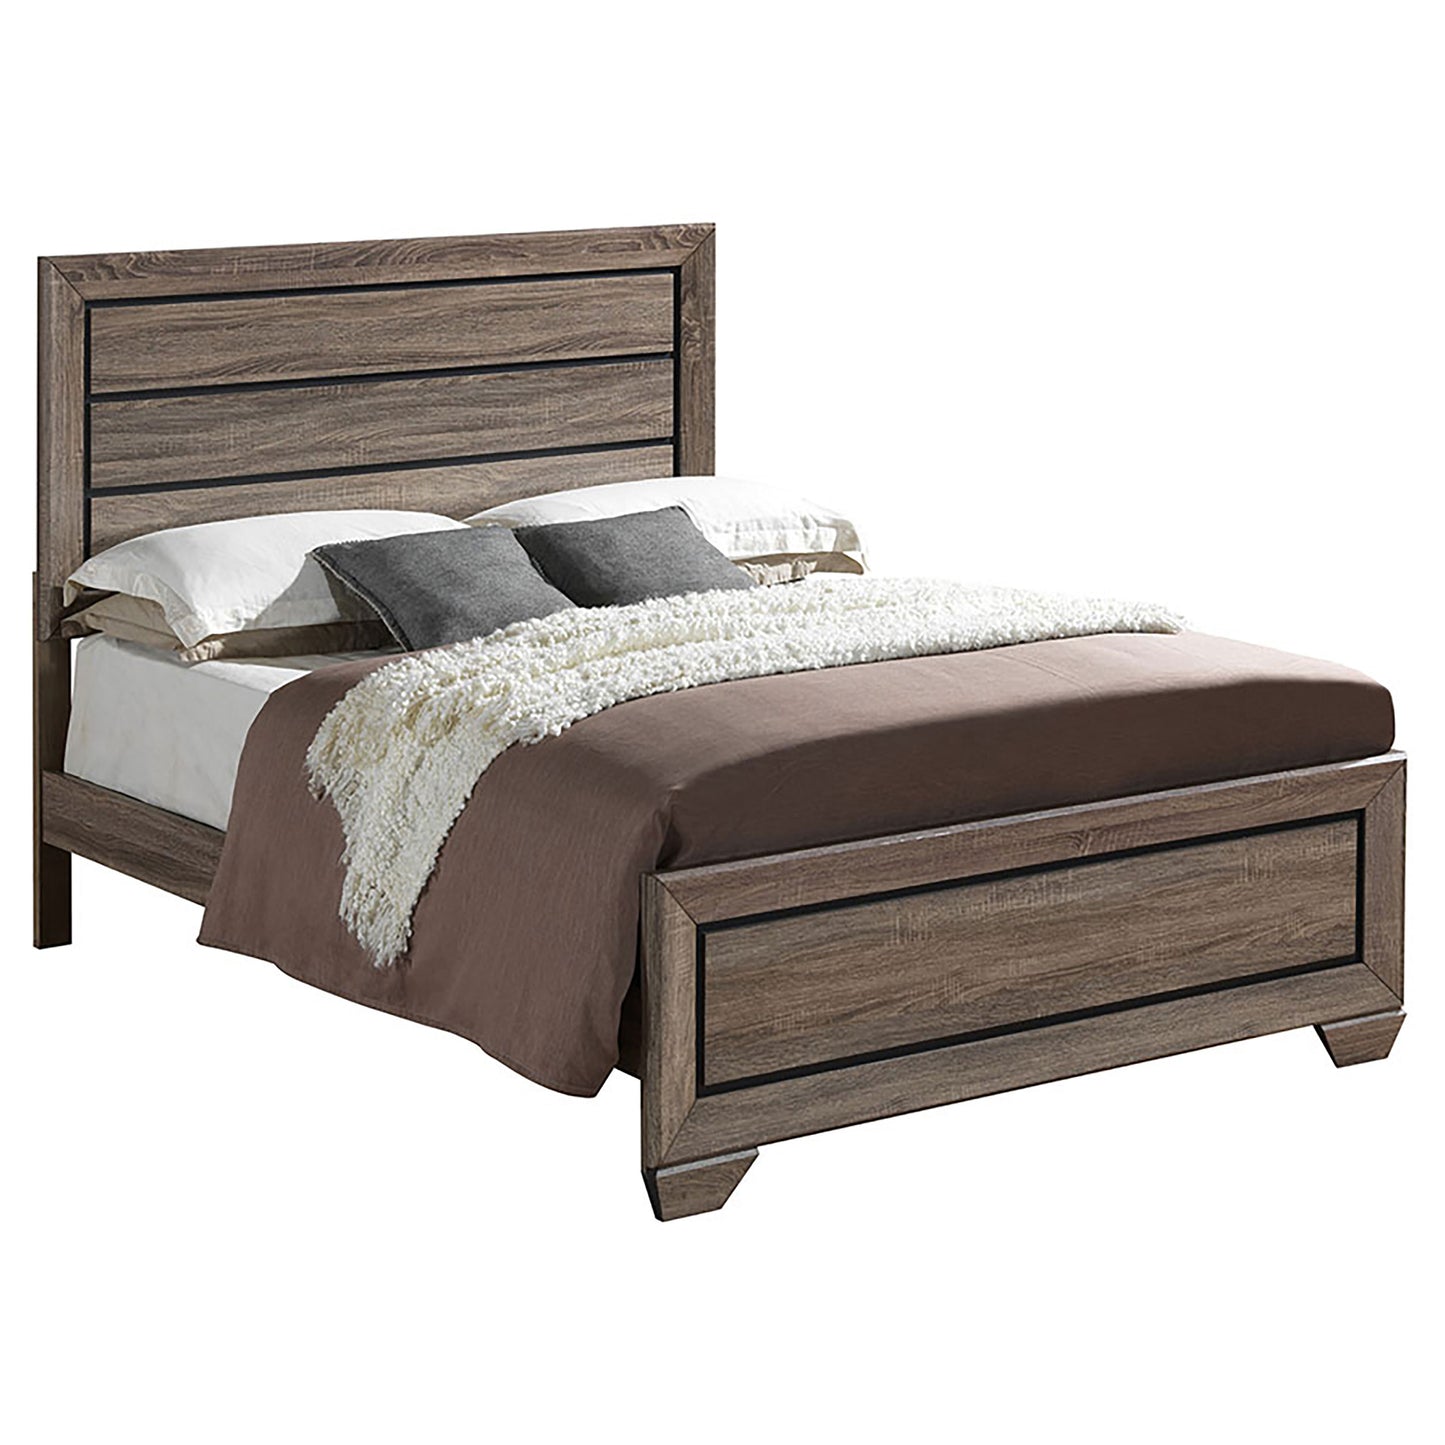 Kauffman 5-piece Queen Bedroom Set Washed Taupe